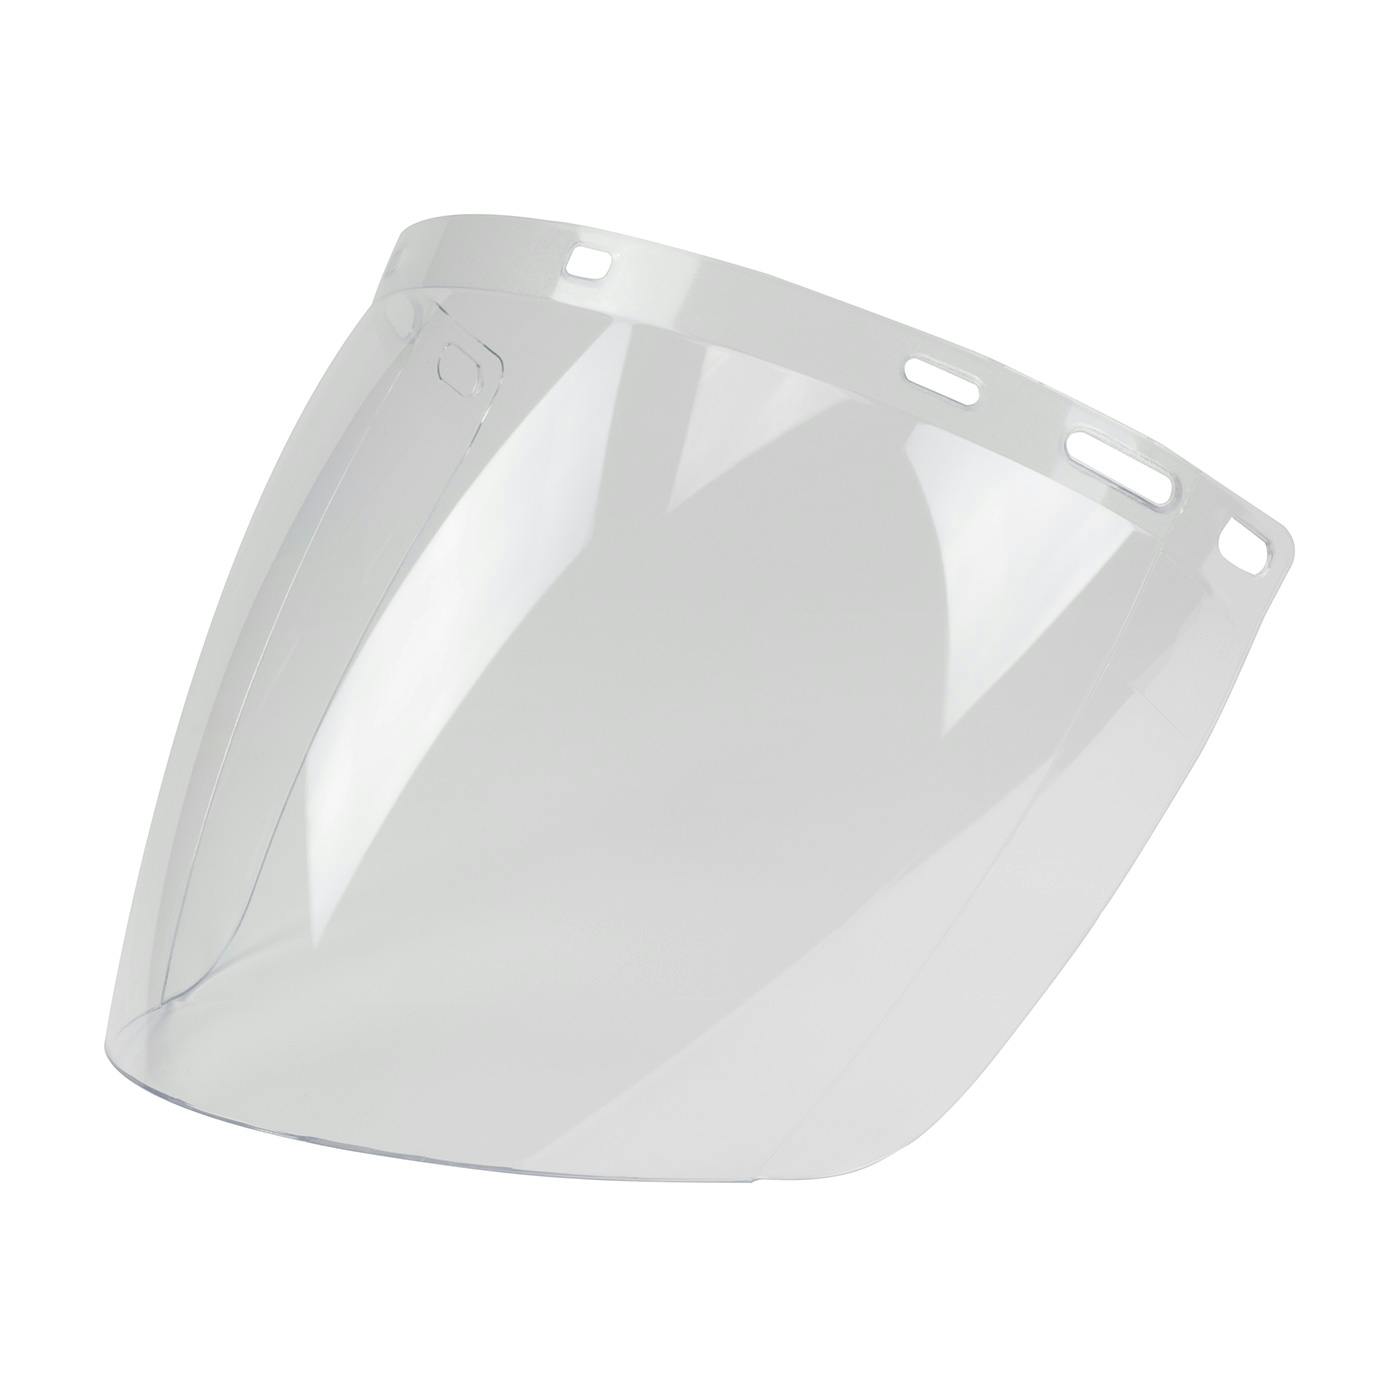 Uncoated Aspherical Polycarbonate Safety Visor - Clear, Clear (251-01-7401) - OS_0